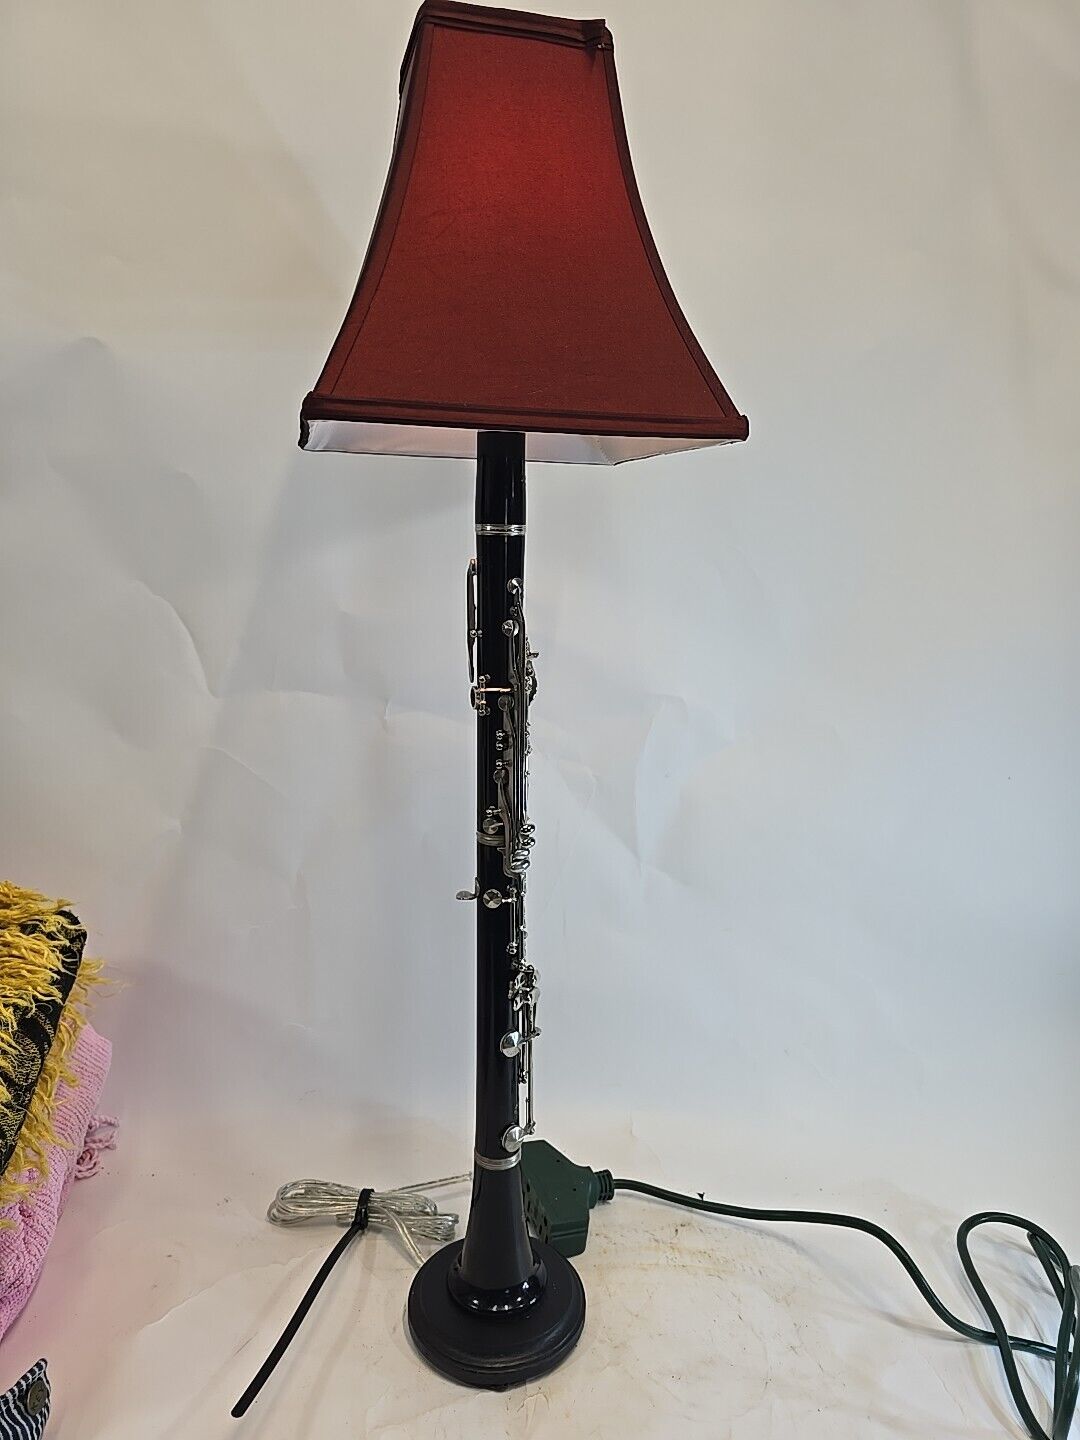 Vito Reso Tone Clarinet Musical Instrument Table Lamp Fair Youth 4H Project New